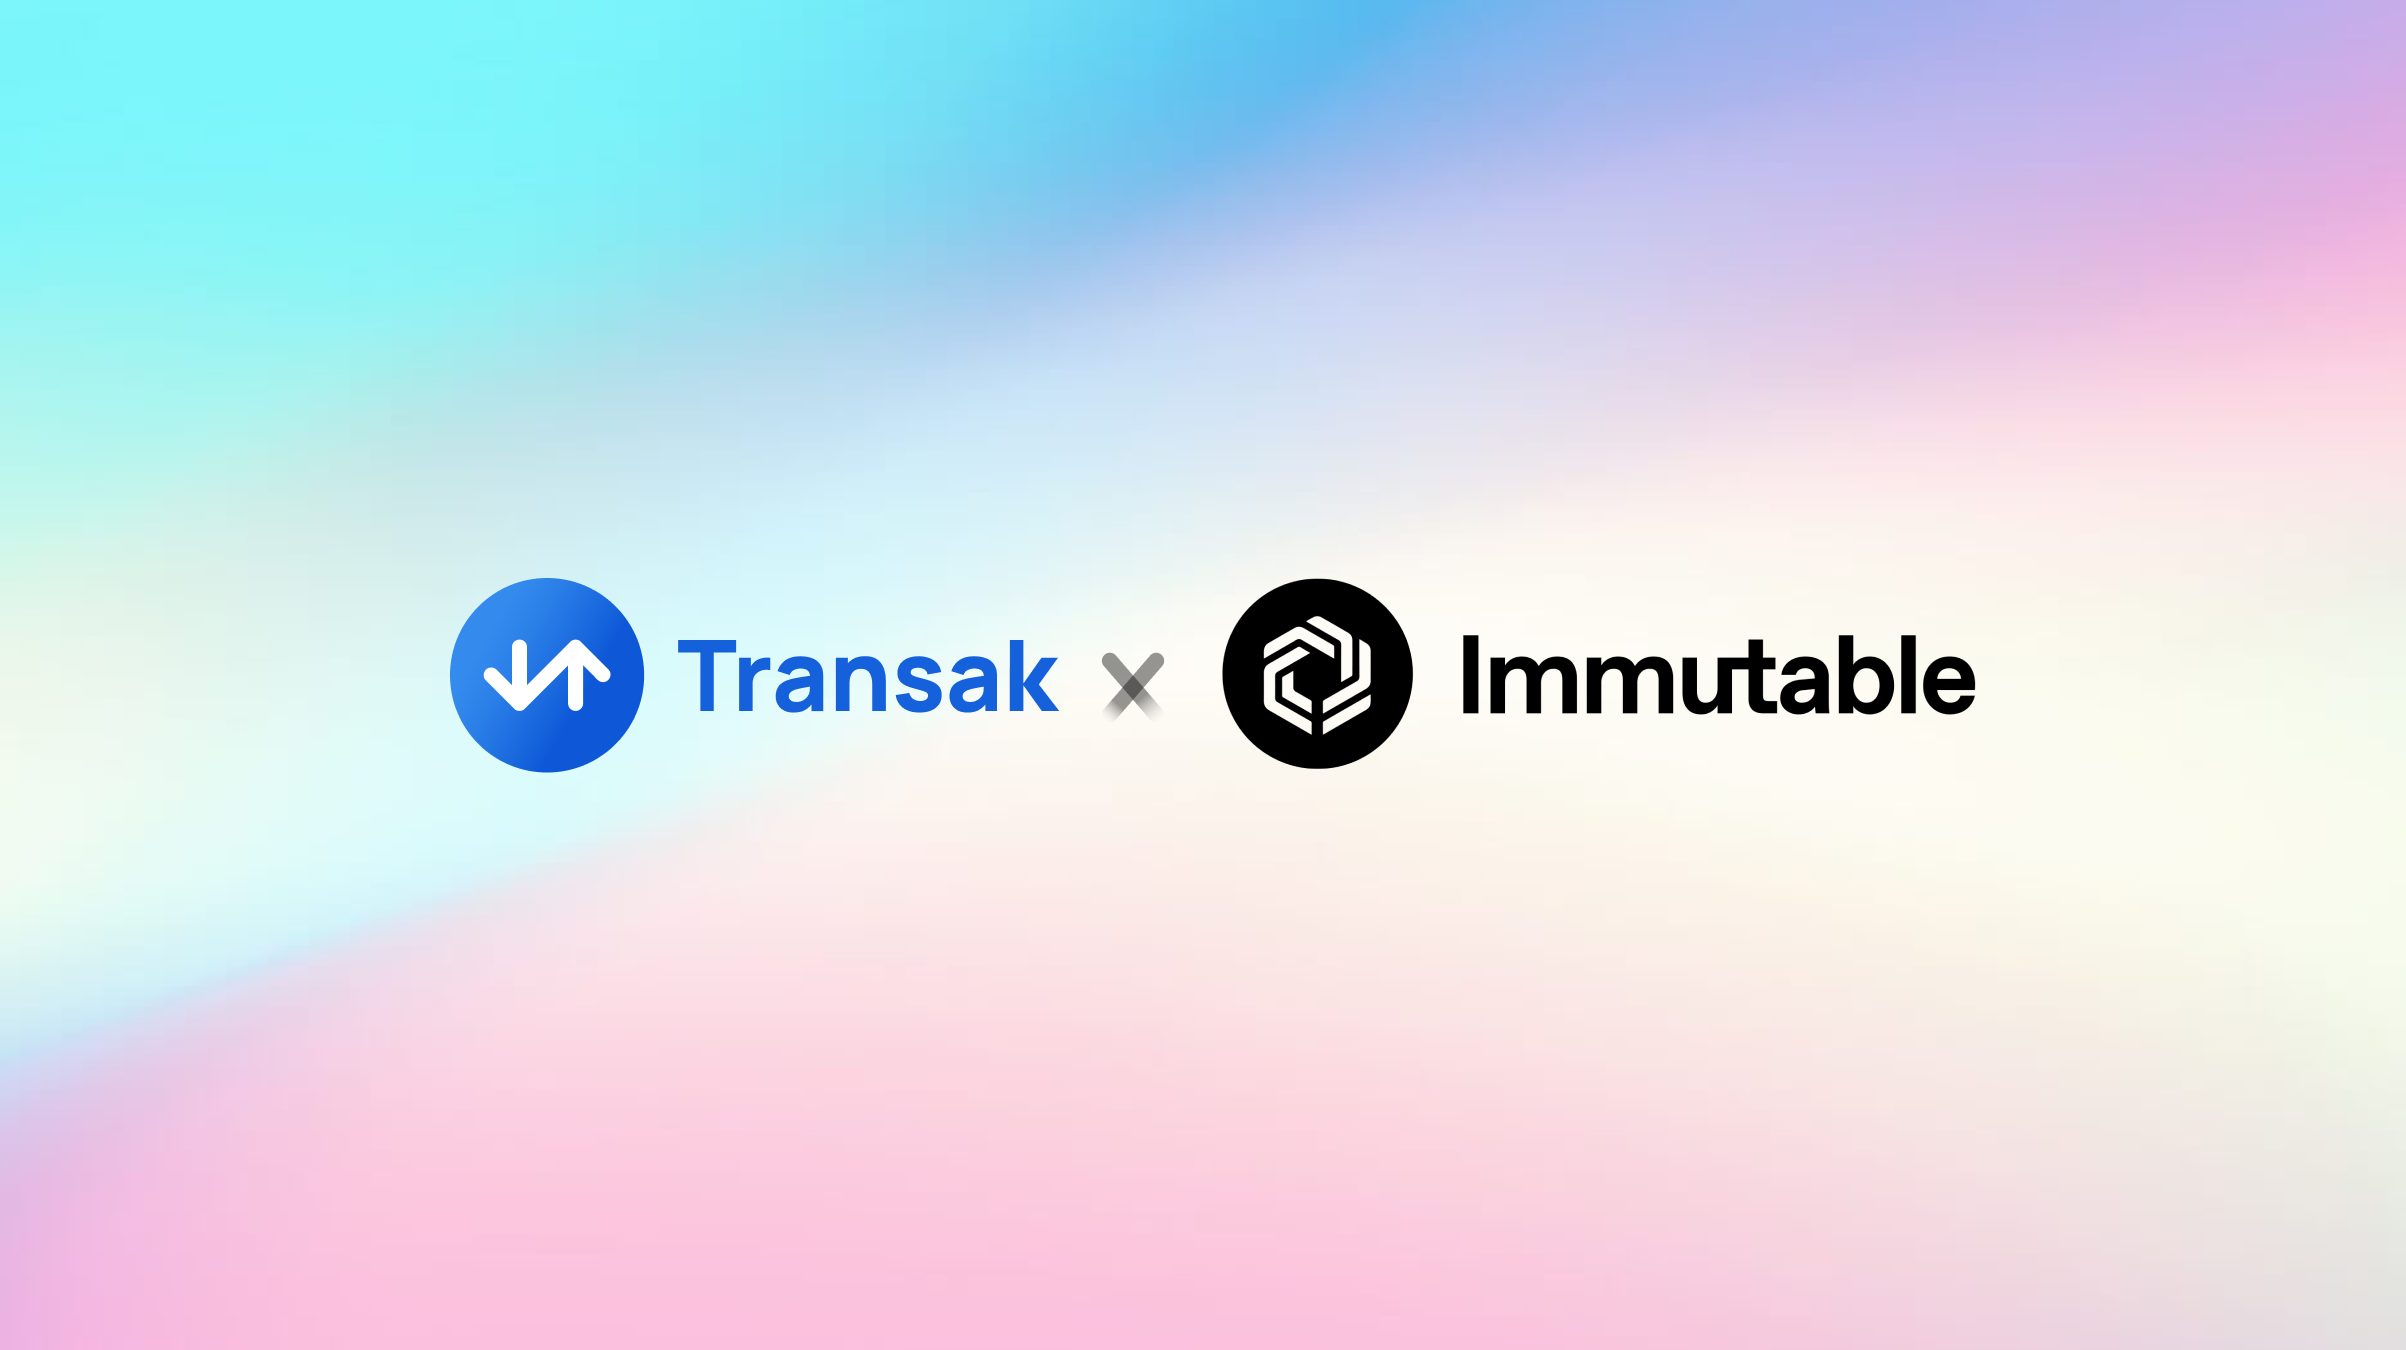 Using Transak, users will be able to onboard directly to SUI Network from 150+ countries by paying with cards, or simple bank transfers.